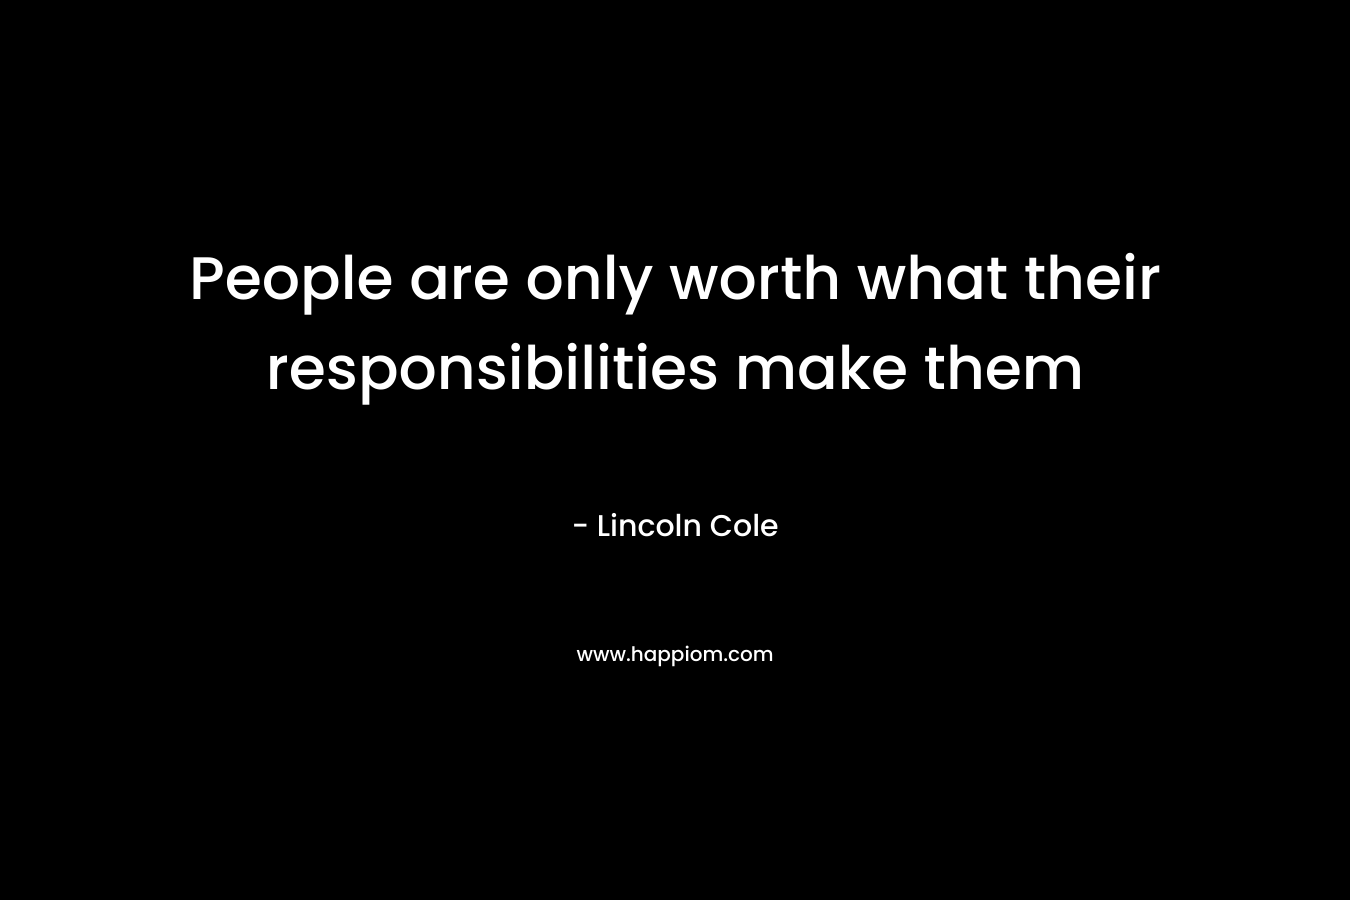 People are only worth what their responsibilities make them